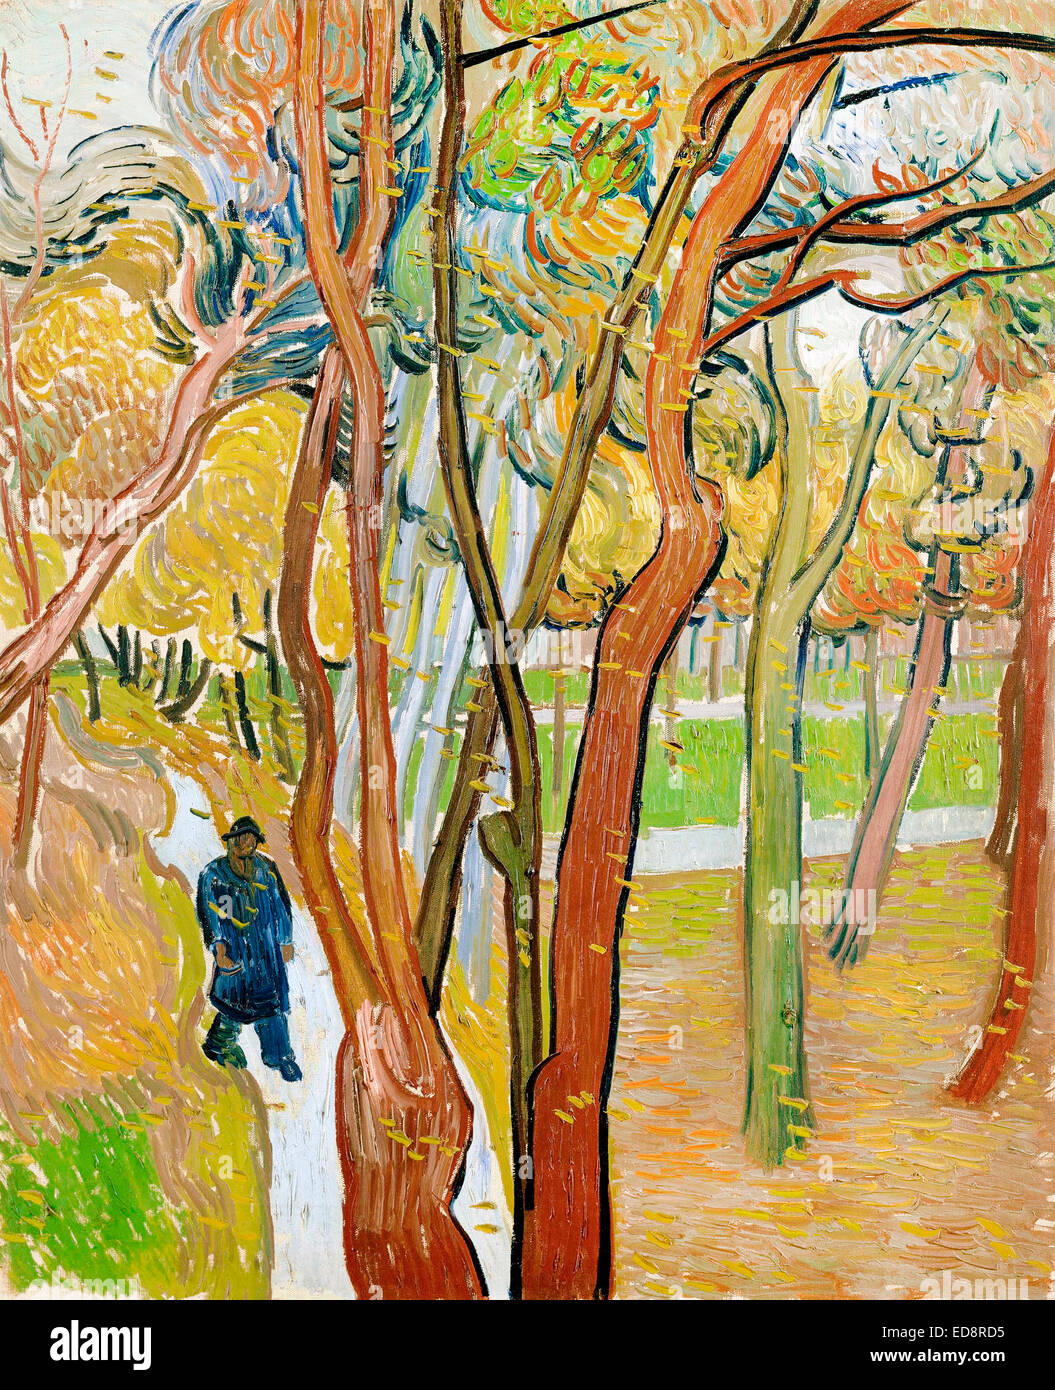 Vincent van Gogh, The Garden of Saint Paul's Hospital (The Fall of the Leaves) 1889 Oil on canvas. Van Gogh Museum, Amsterdam Stock Photo